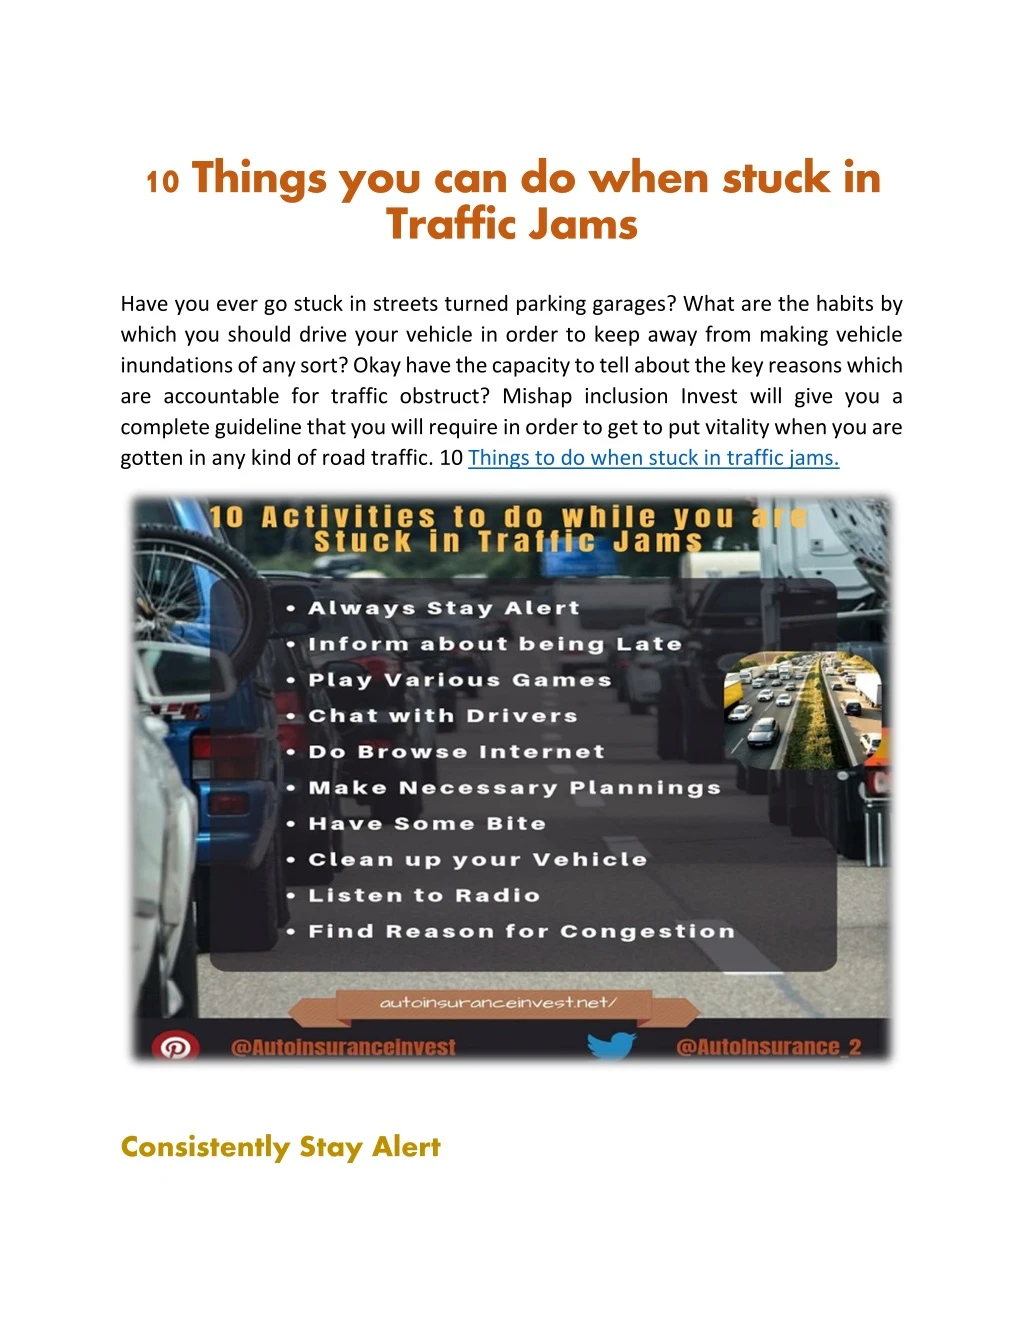 10 things you can do when stuck in traffic jams